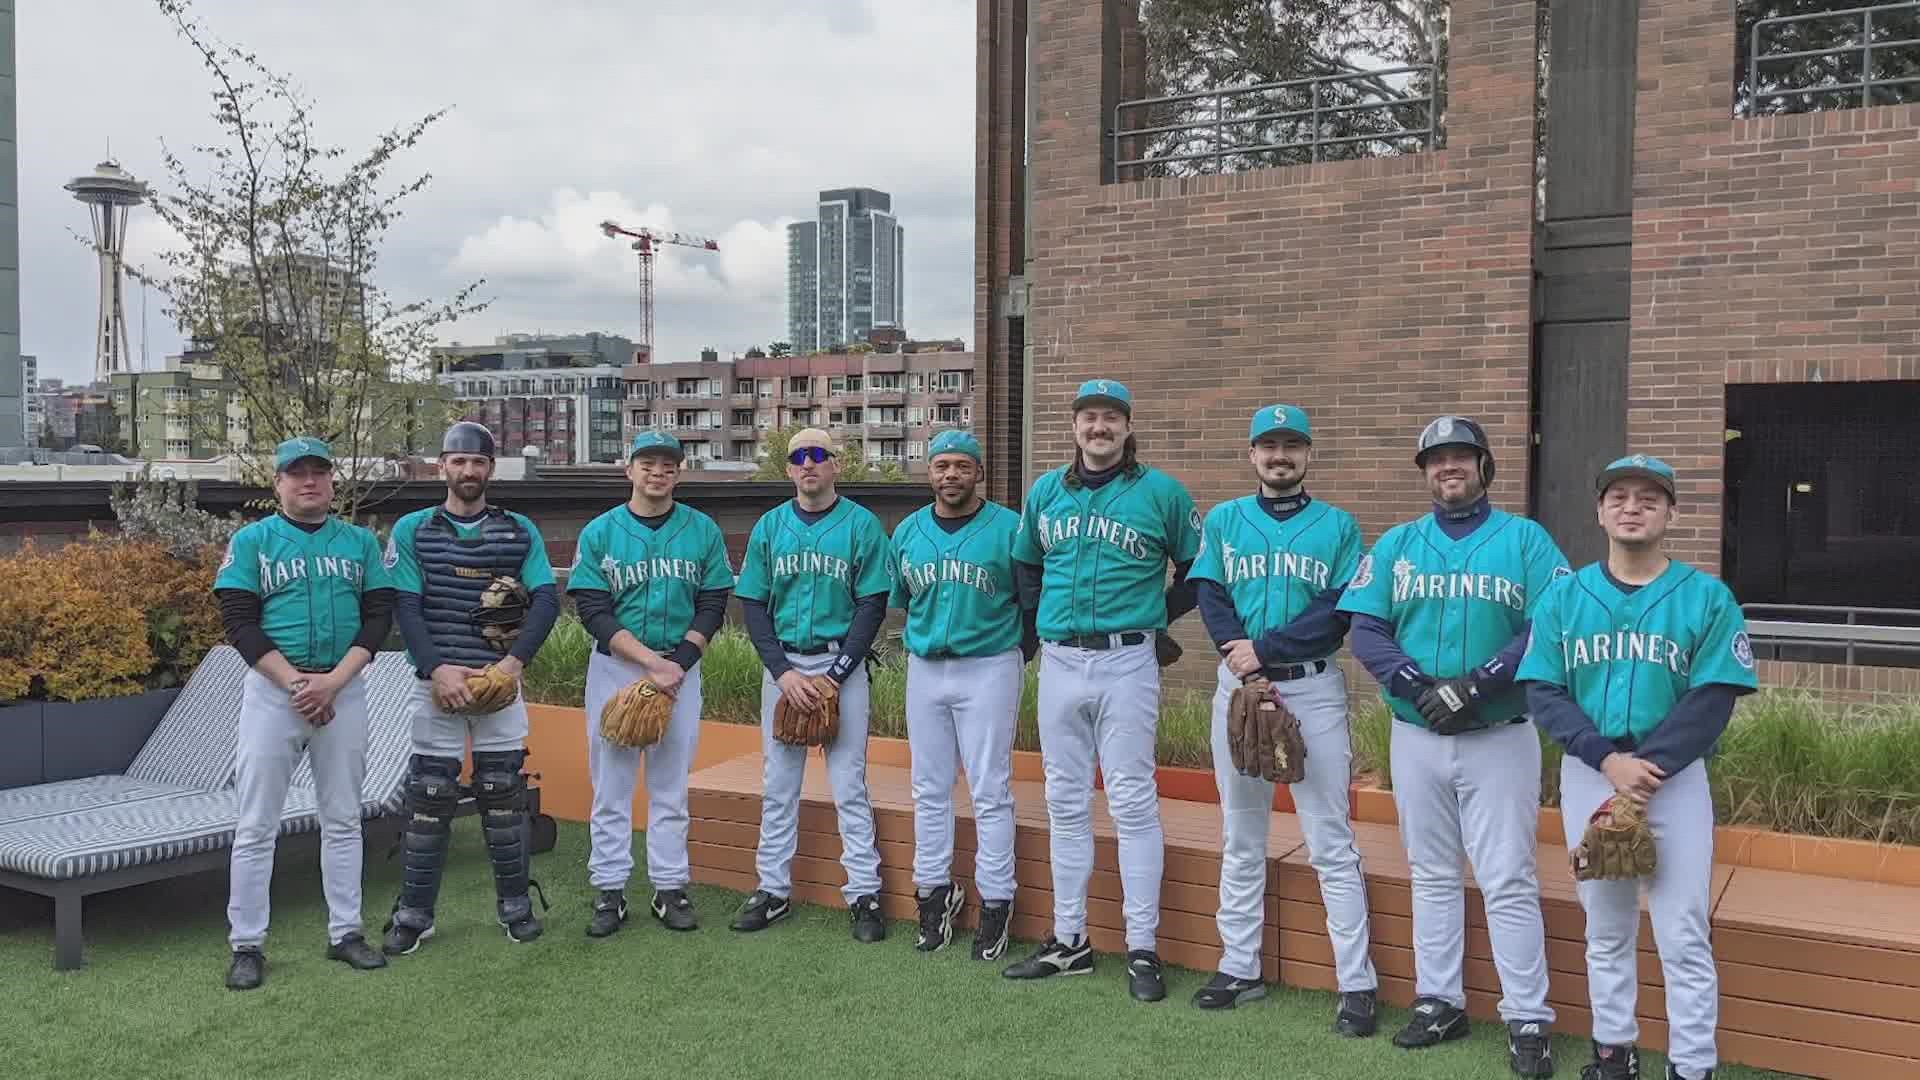 A group of passionate Mariners paid homage to the 1995 squad at the 2022 home opener.